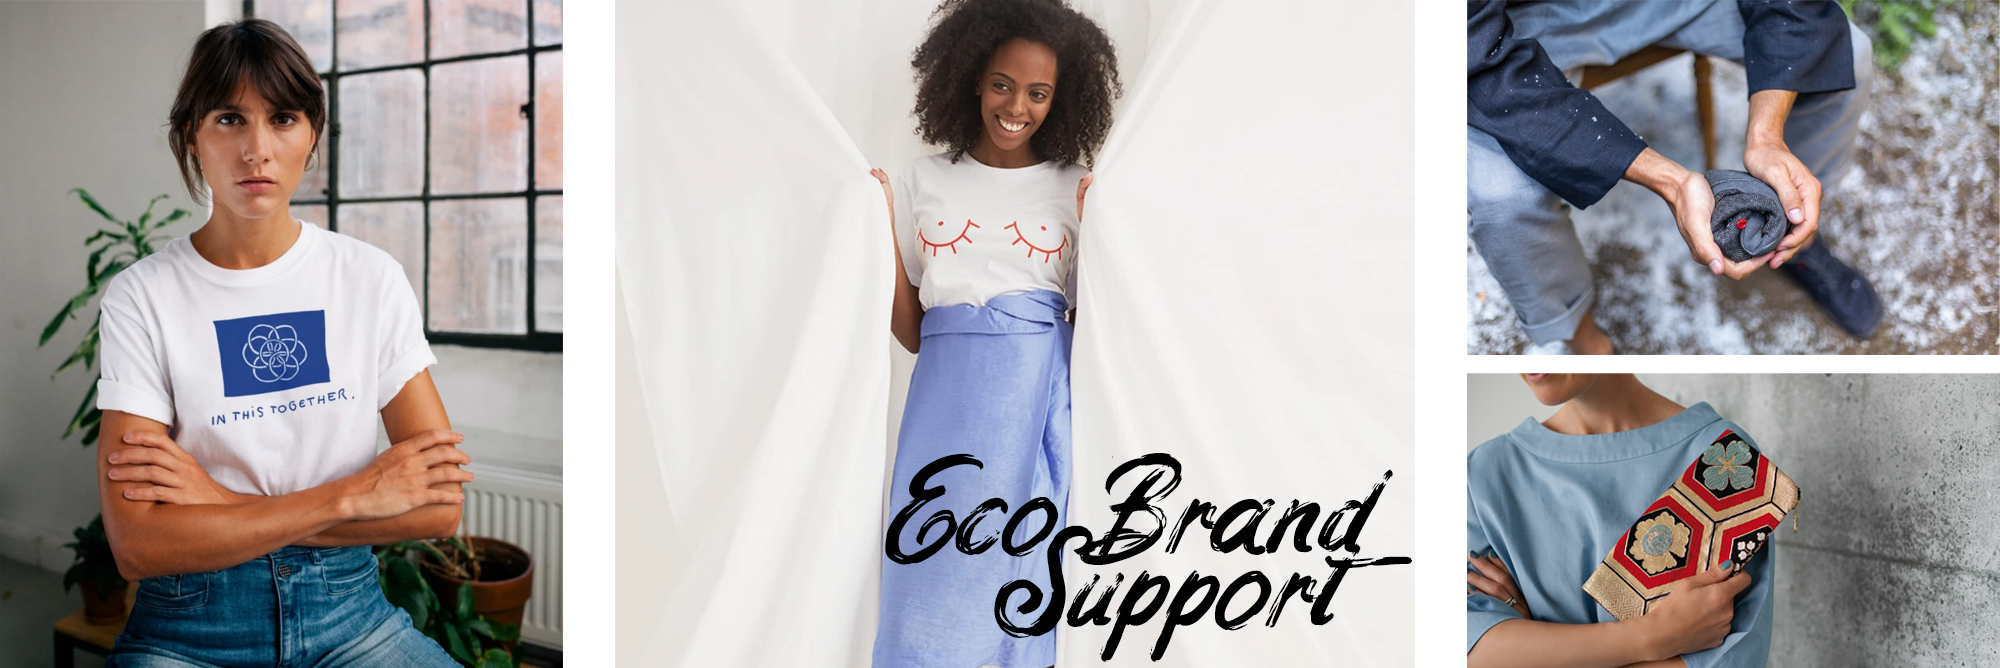 Eco brand support